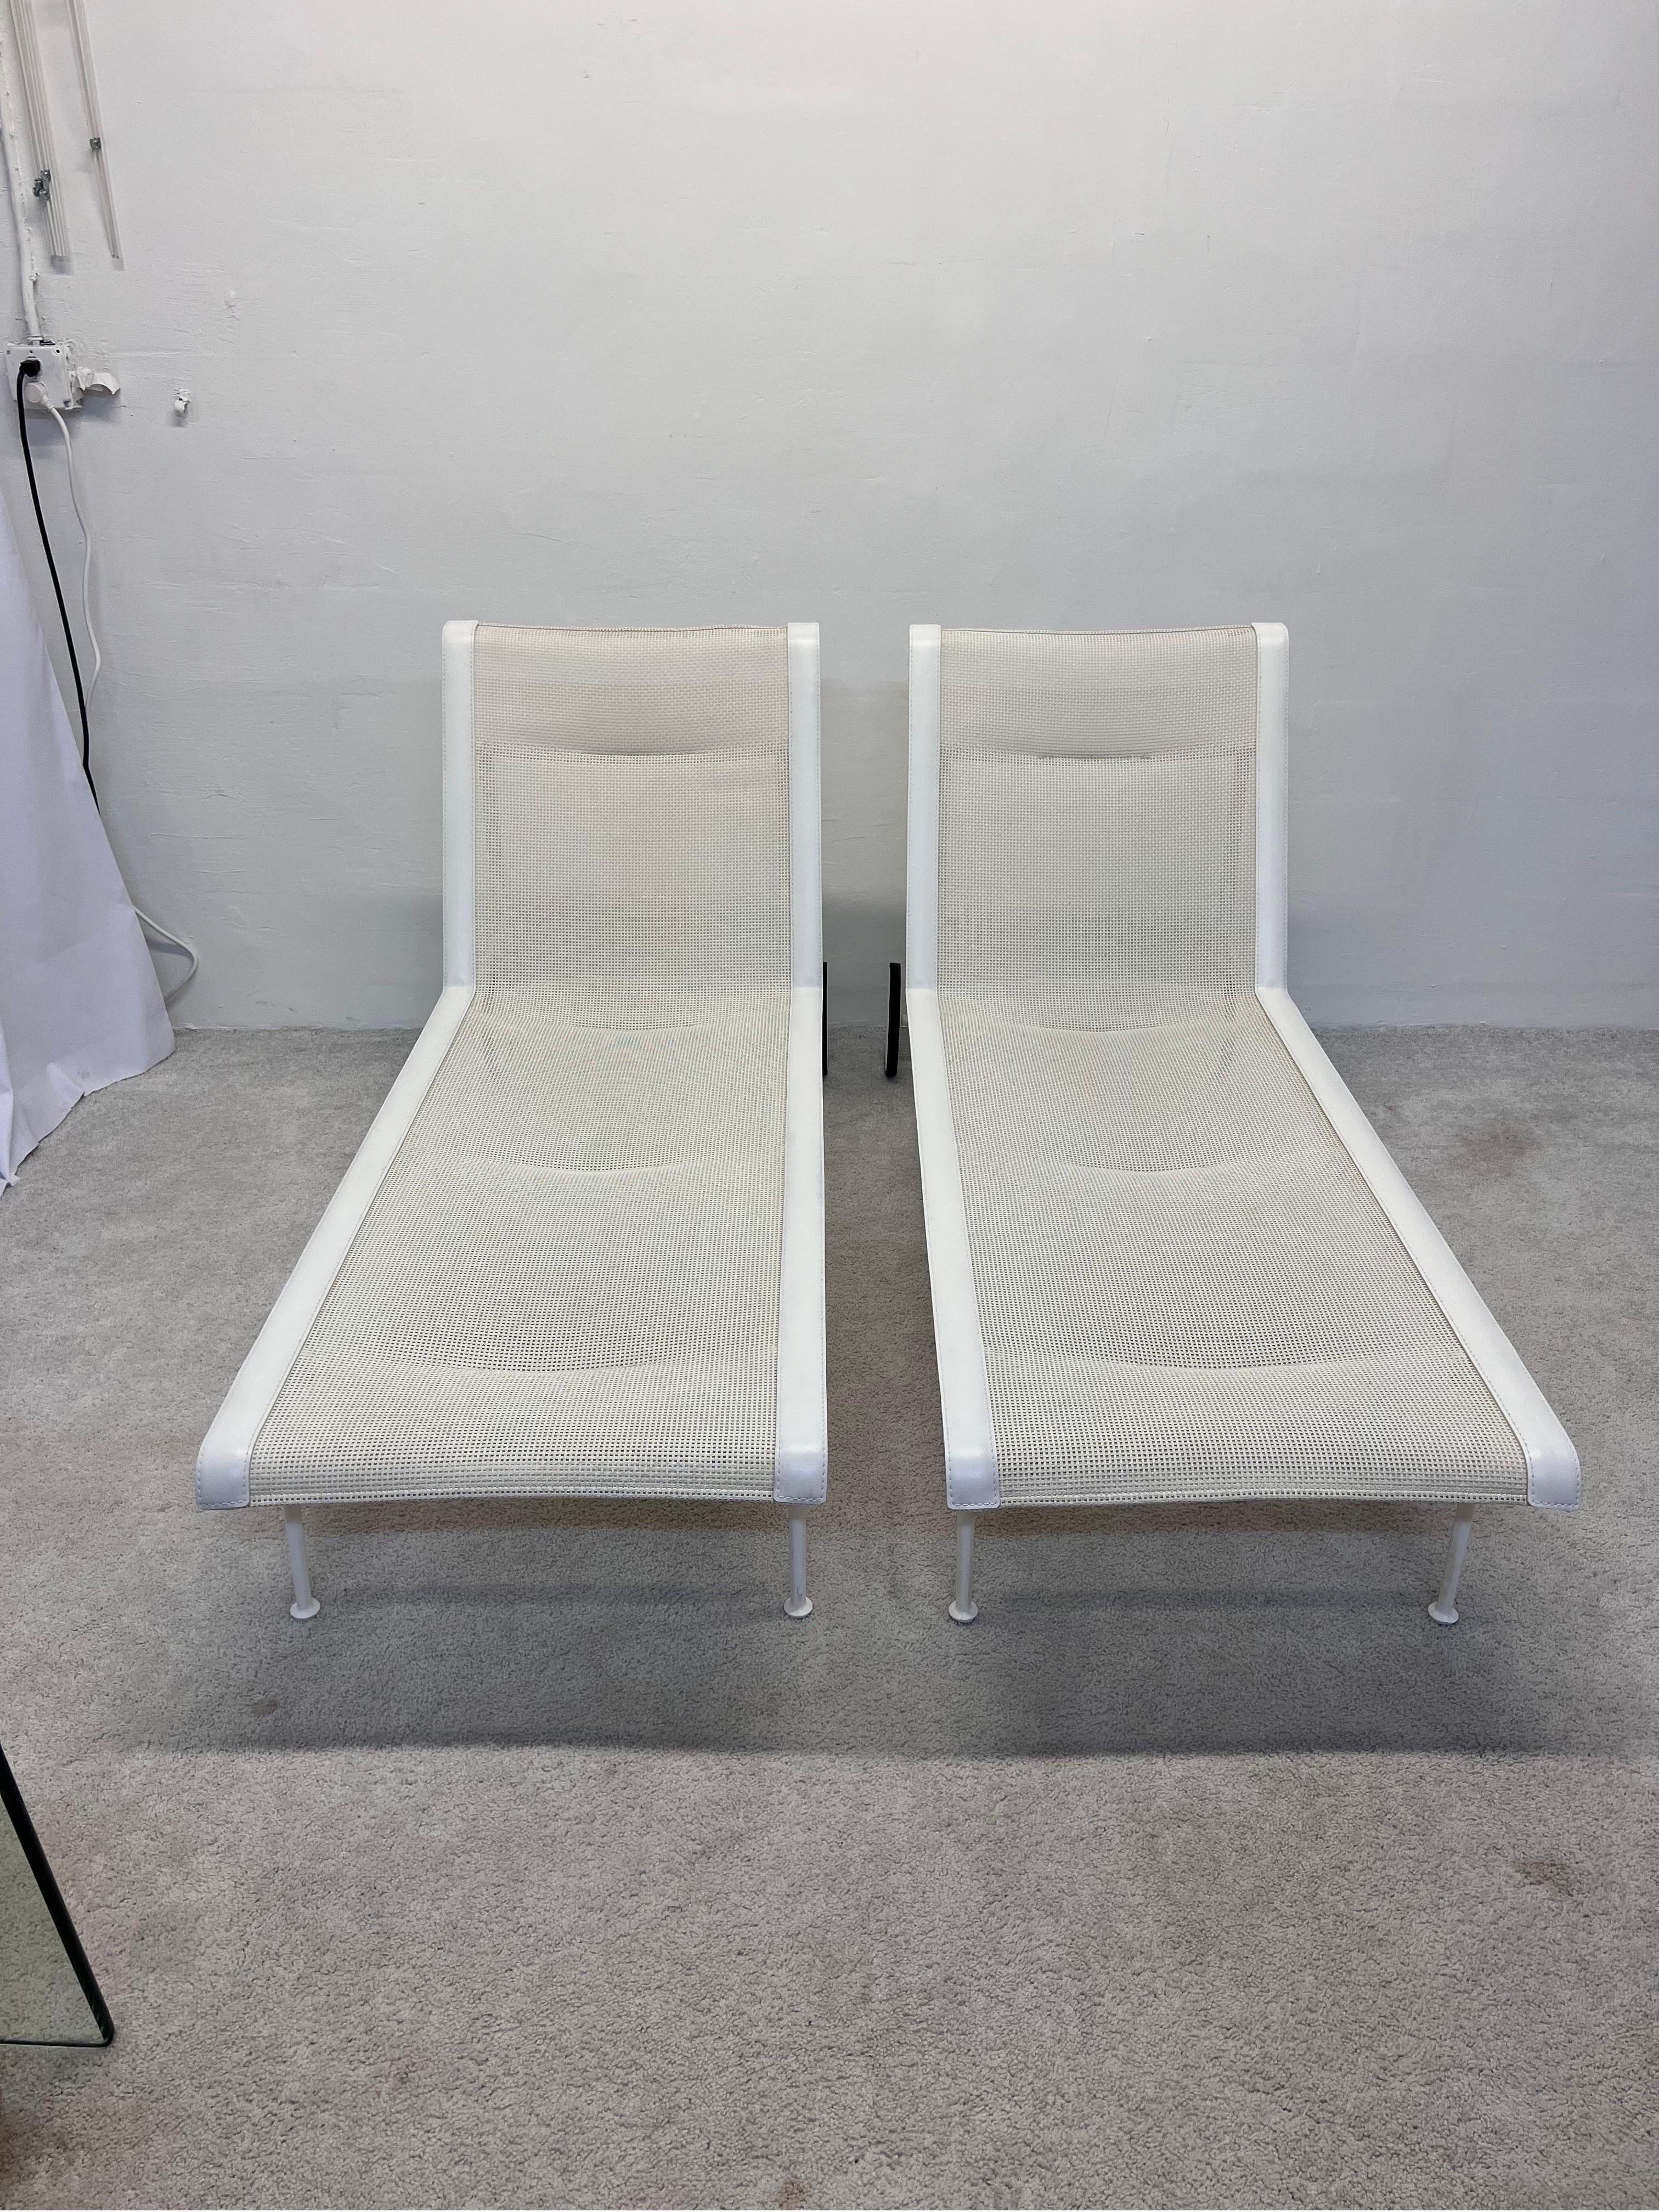 Richard Schultz 1966 Adjustable Outdoor Chaise Lounges for Knoll - a Pair 11